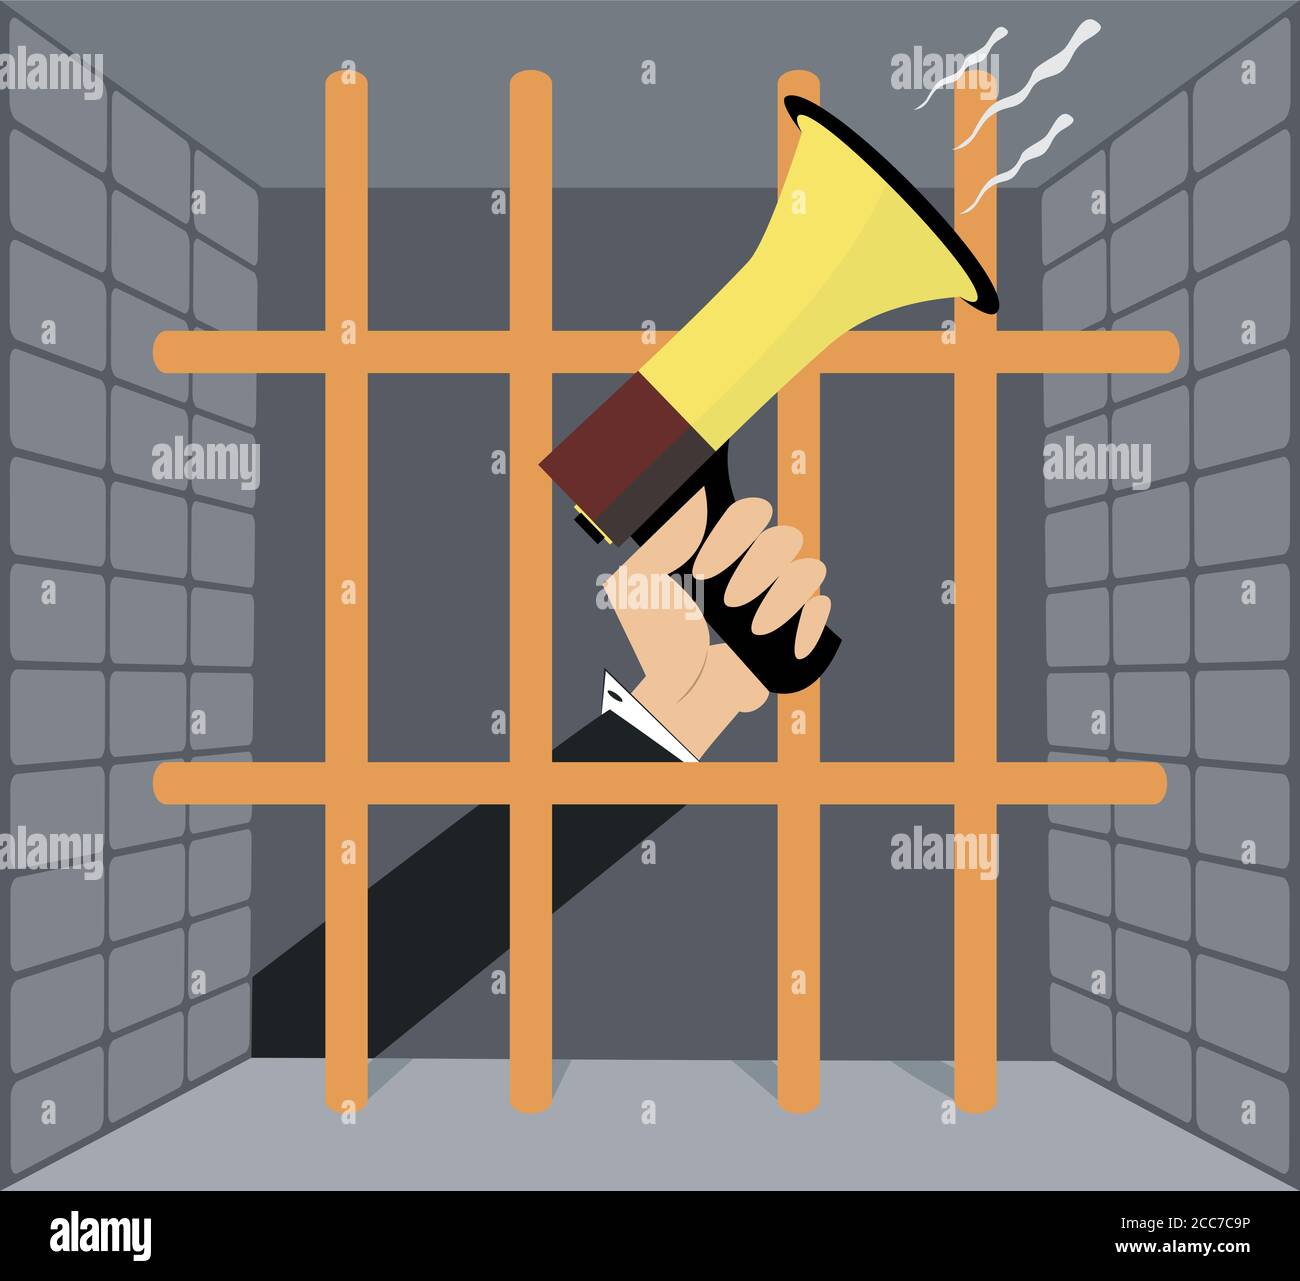 Hand with megaphone behind the bars illustration. Hand with megaphone behind the prison bars Stock Vector